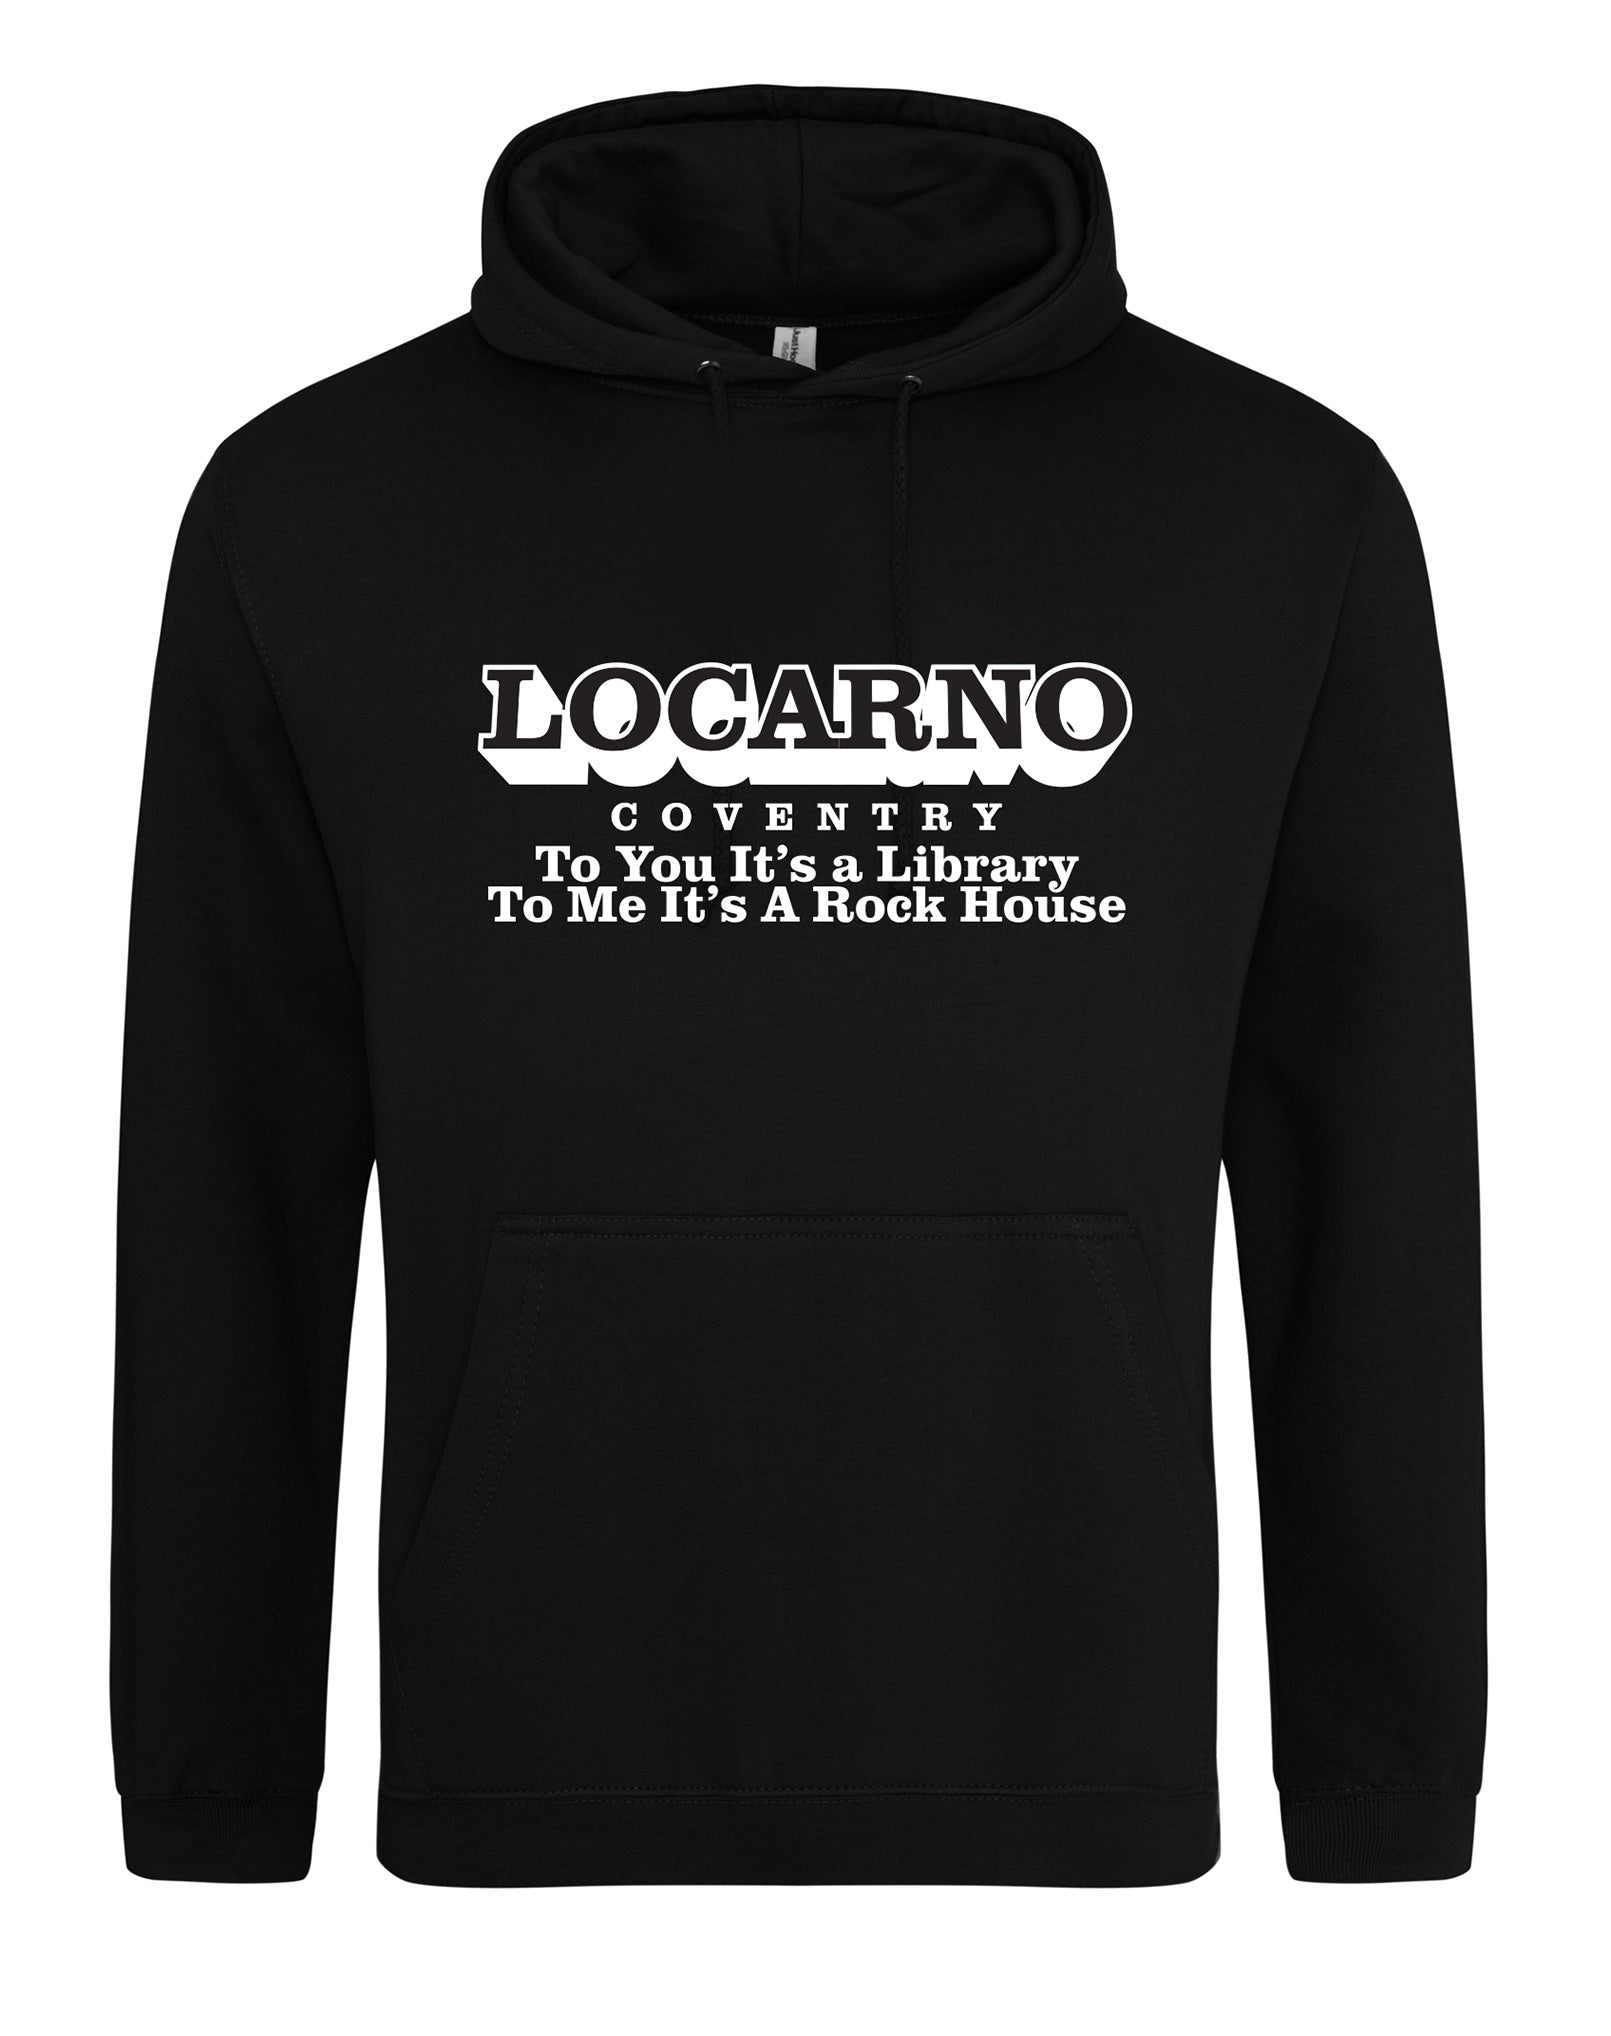 Locarno/Rockhouse - Coventry - unisex fit hoodie - various colours - Dirty Stop Outs